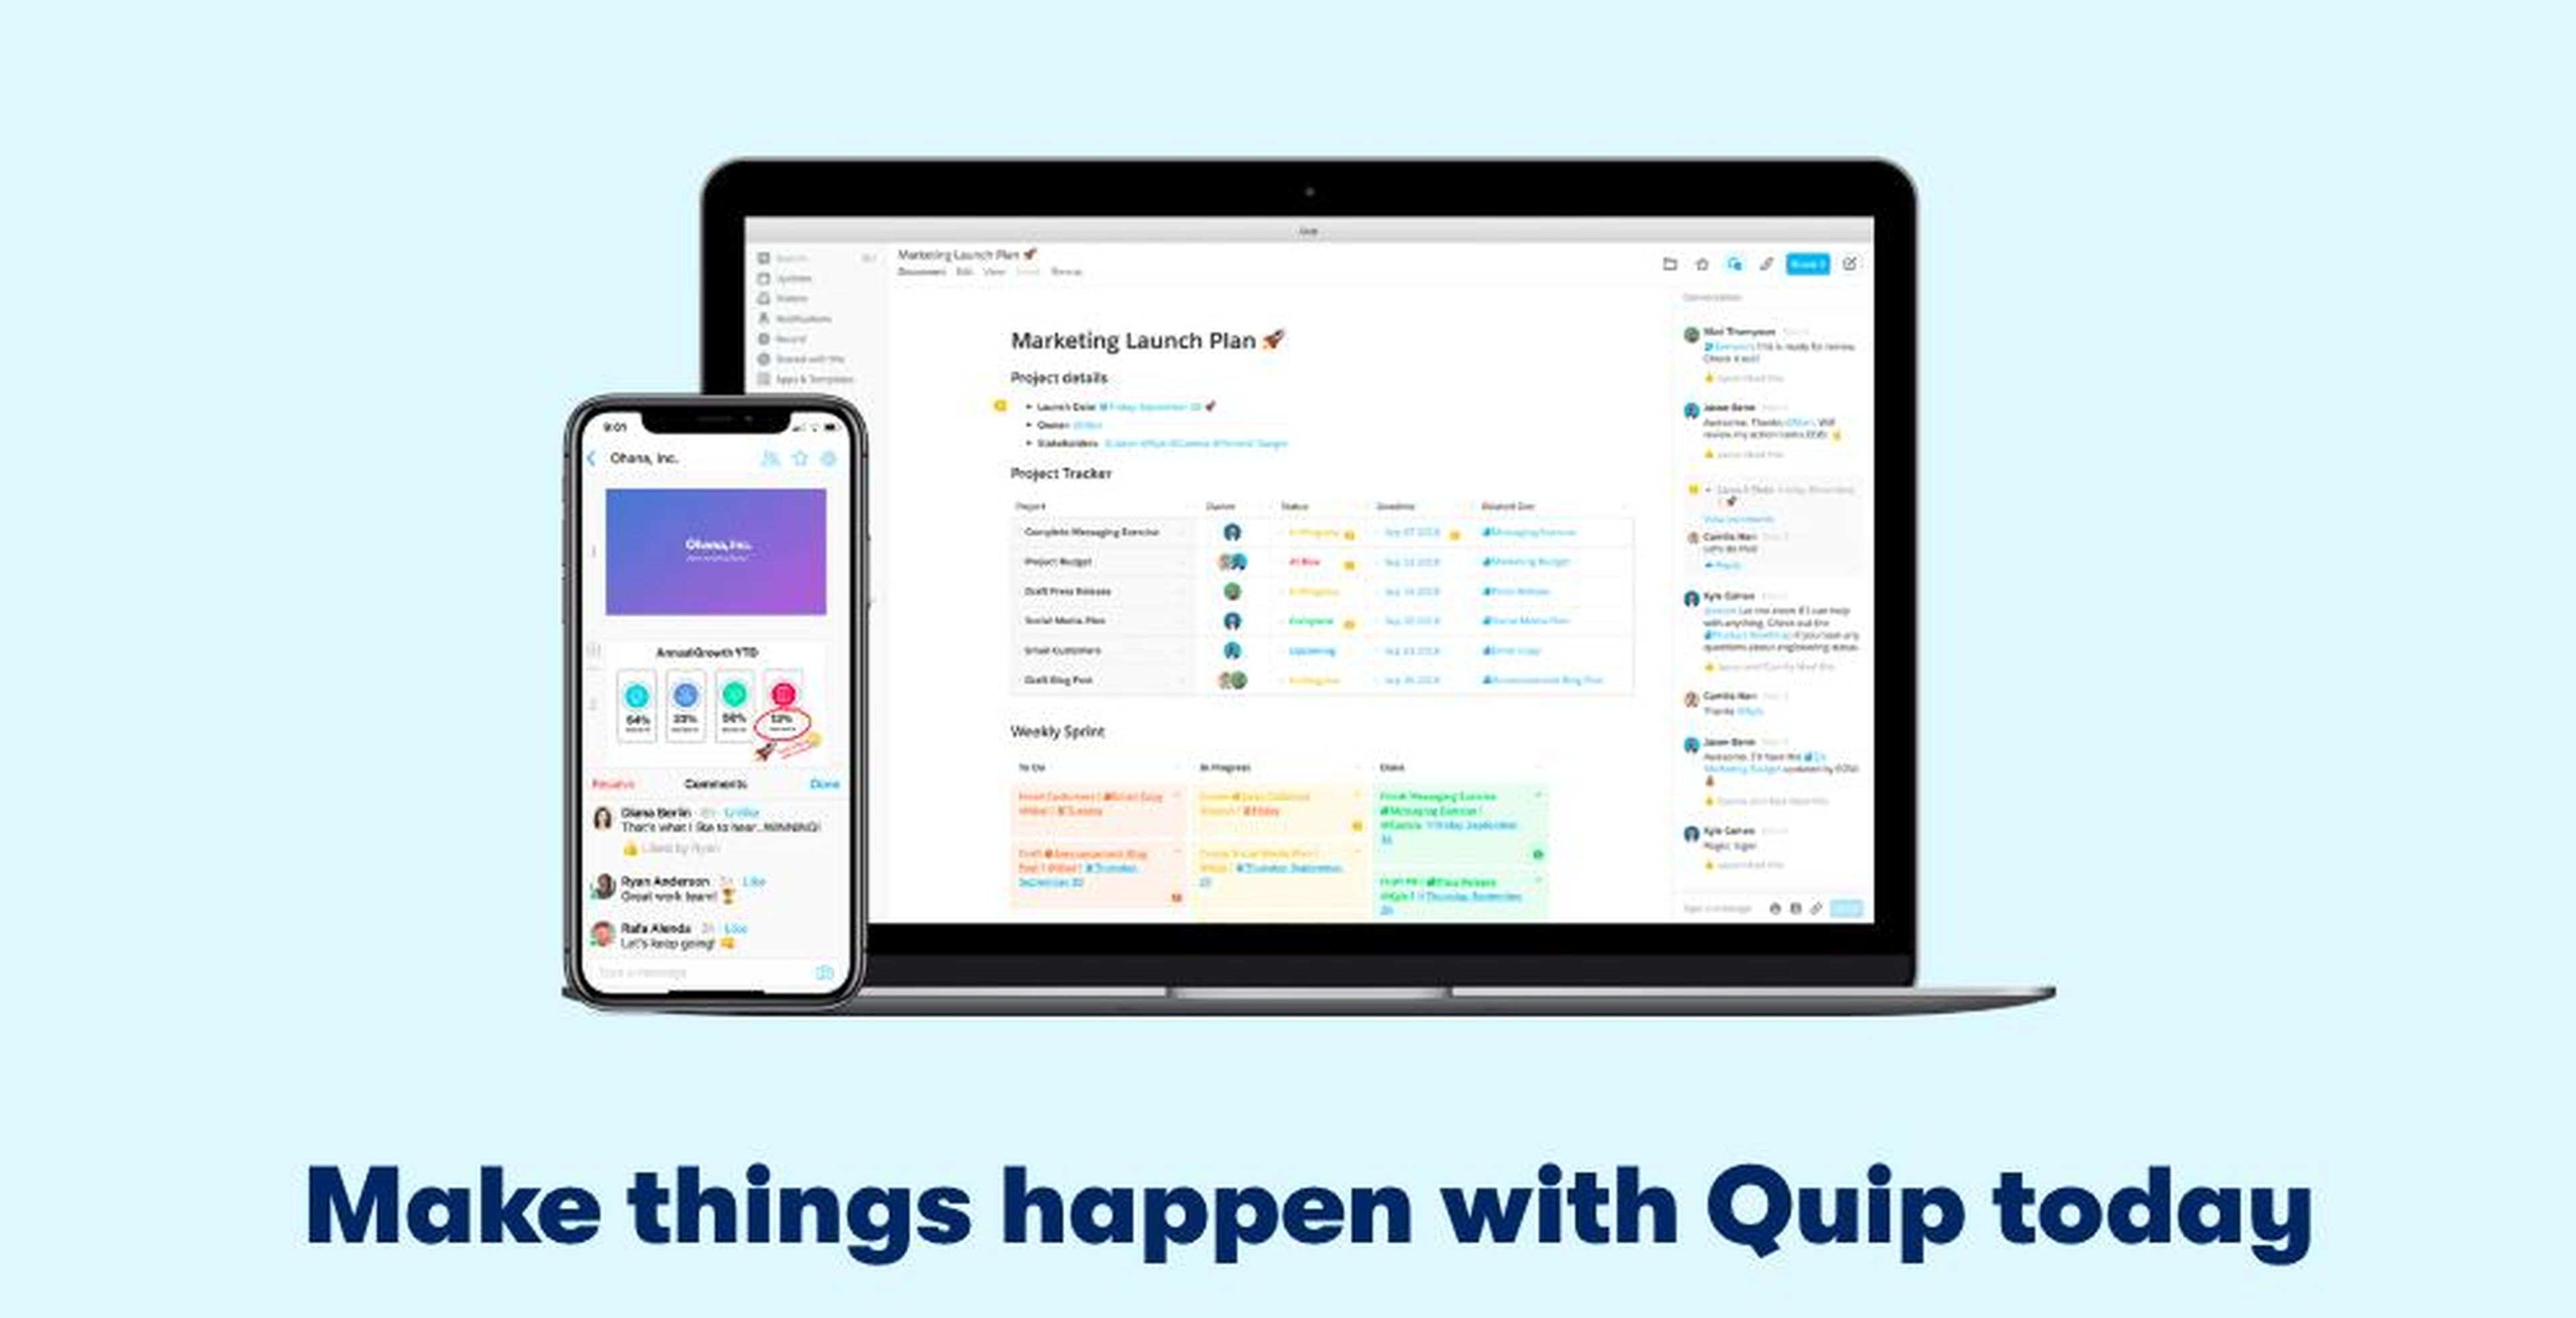 Salesforce-owned Quip could be a good Google Docs replacement for you.